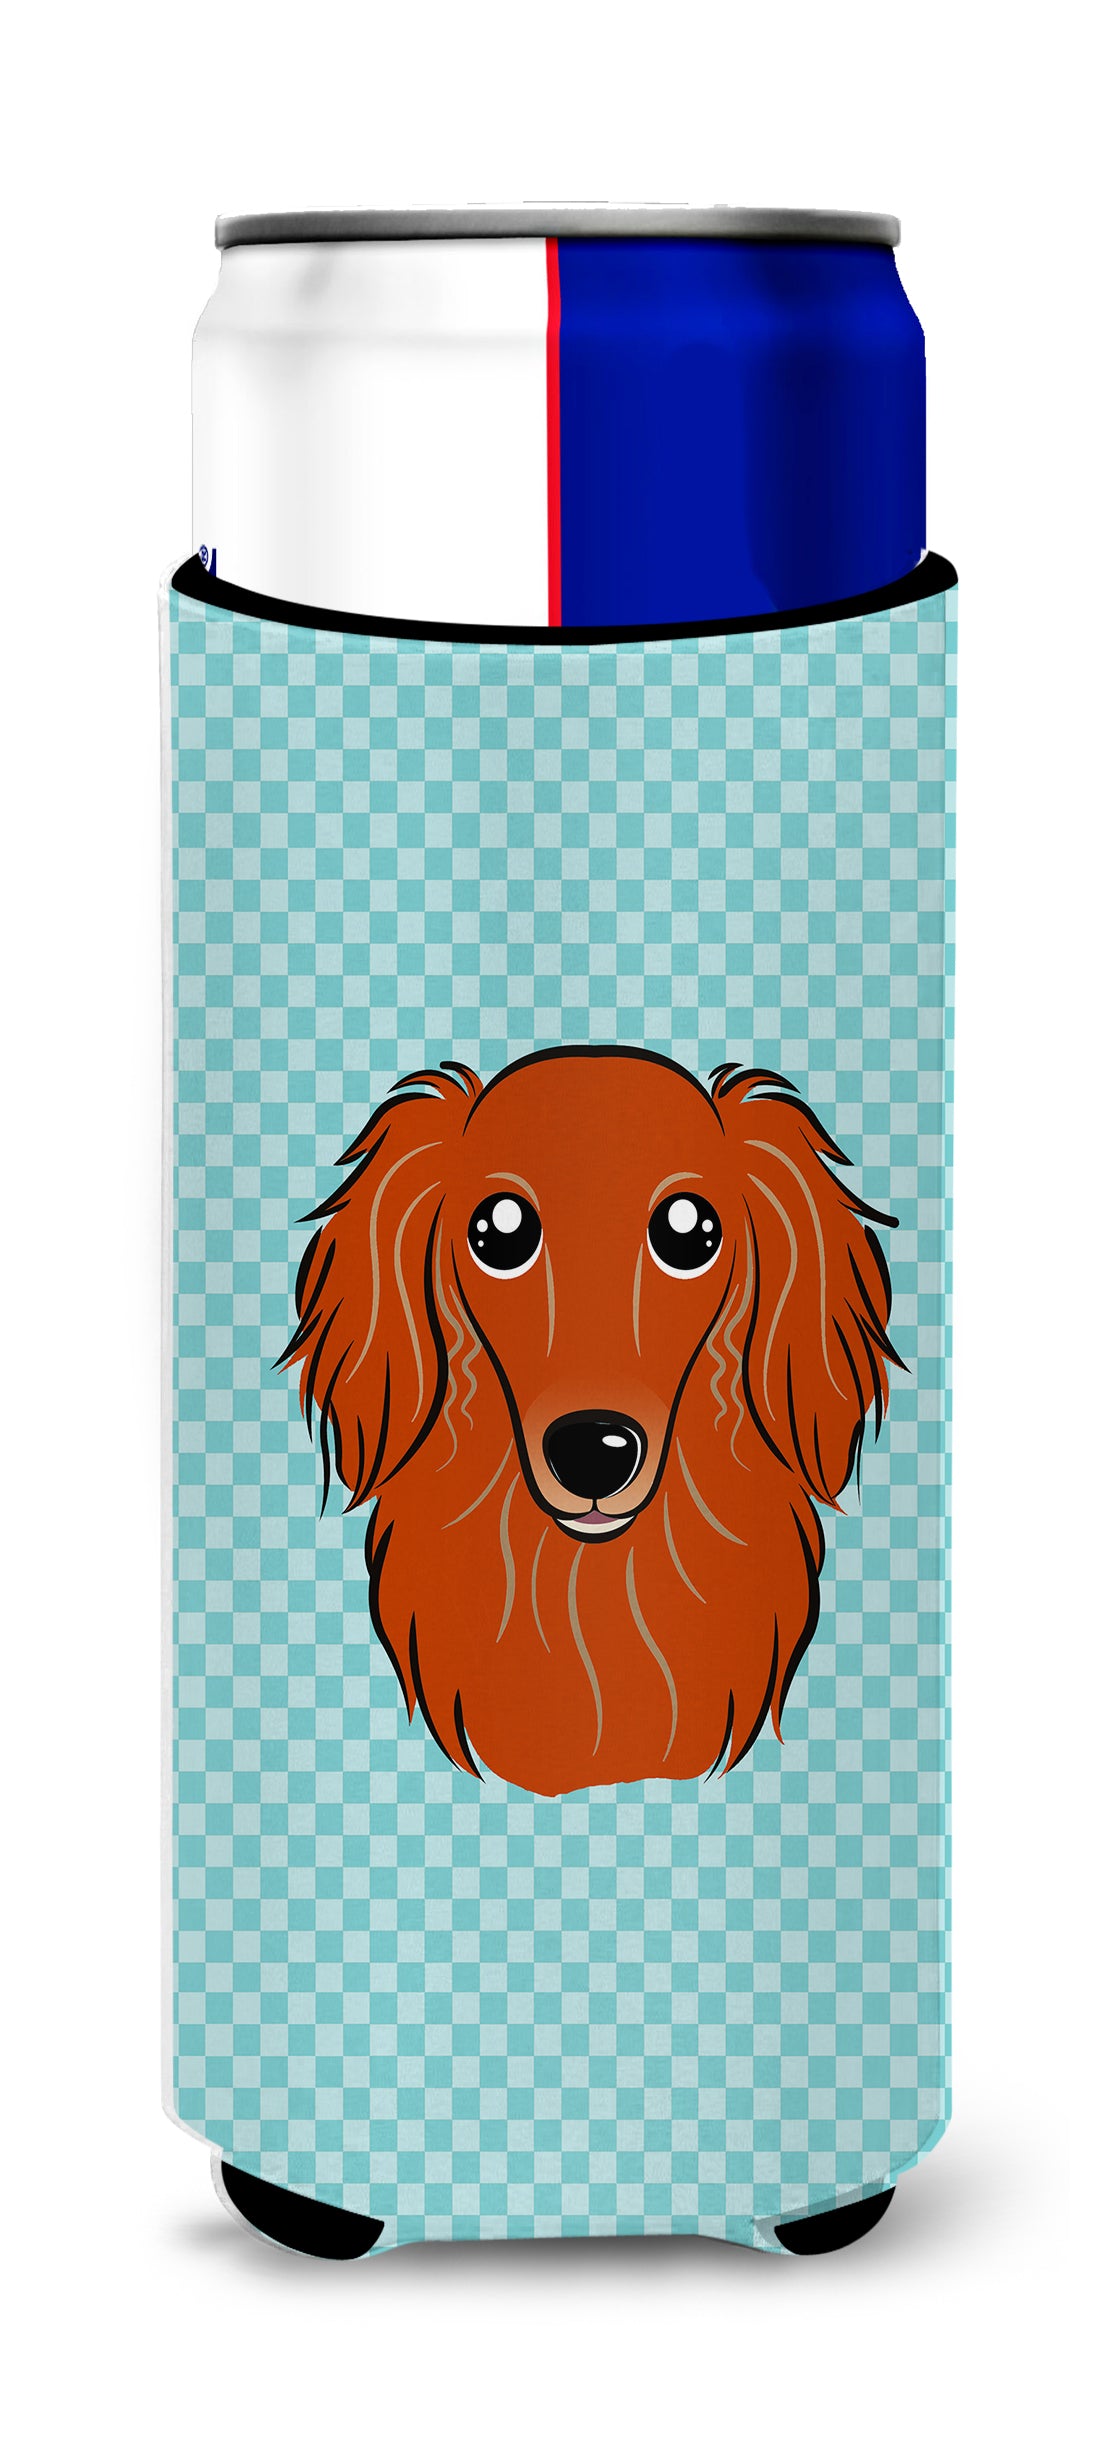 Checkerboard Blue Longhair Red Dachshund Ultra Beverage Insulators for slim cans.